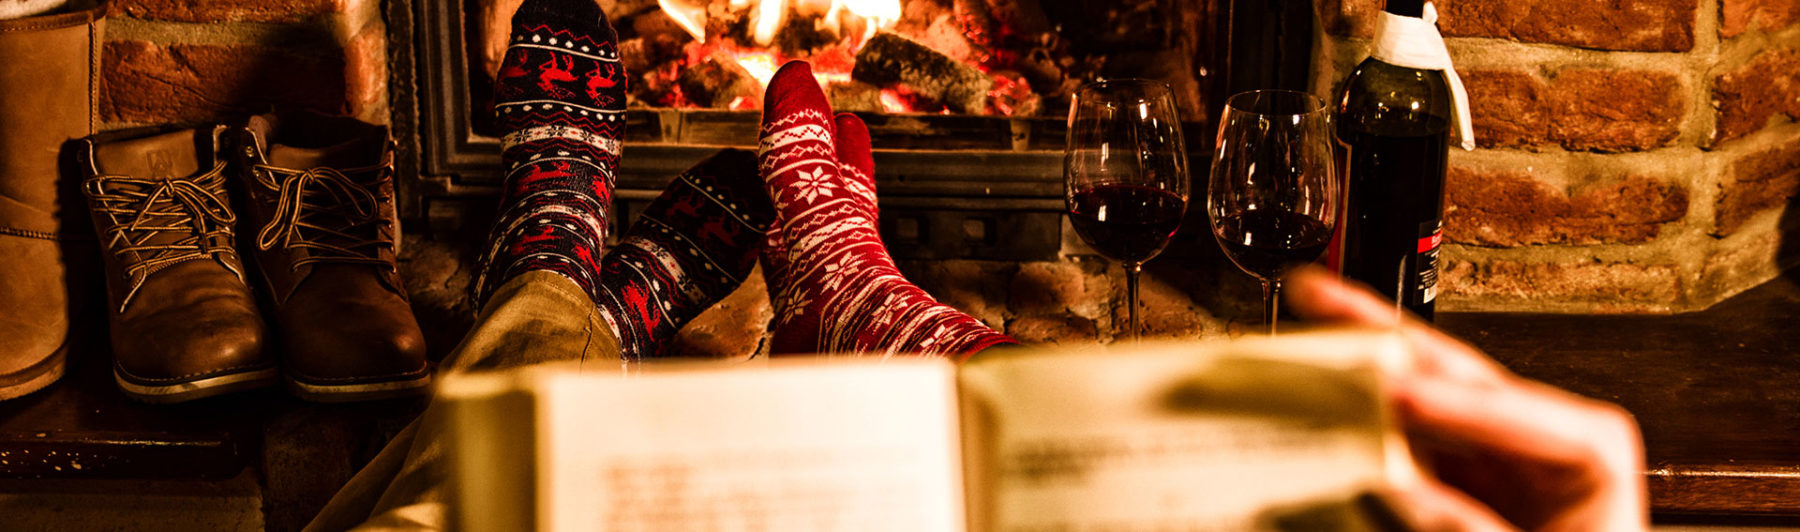 What We’re Reading & Watching This Holiday Season